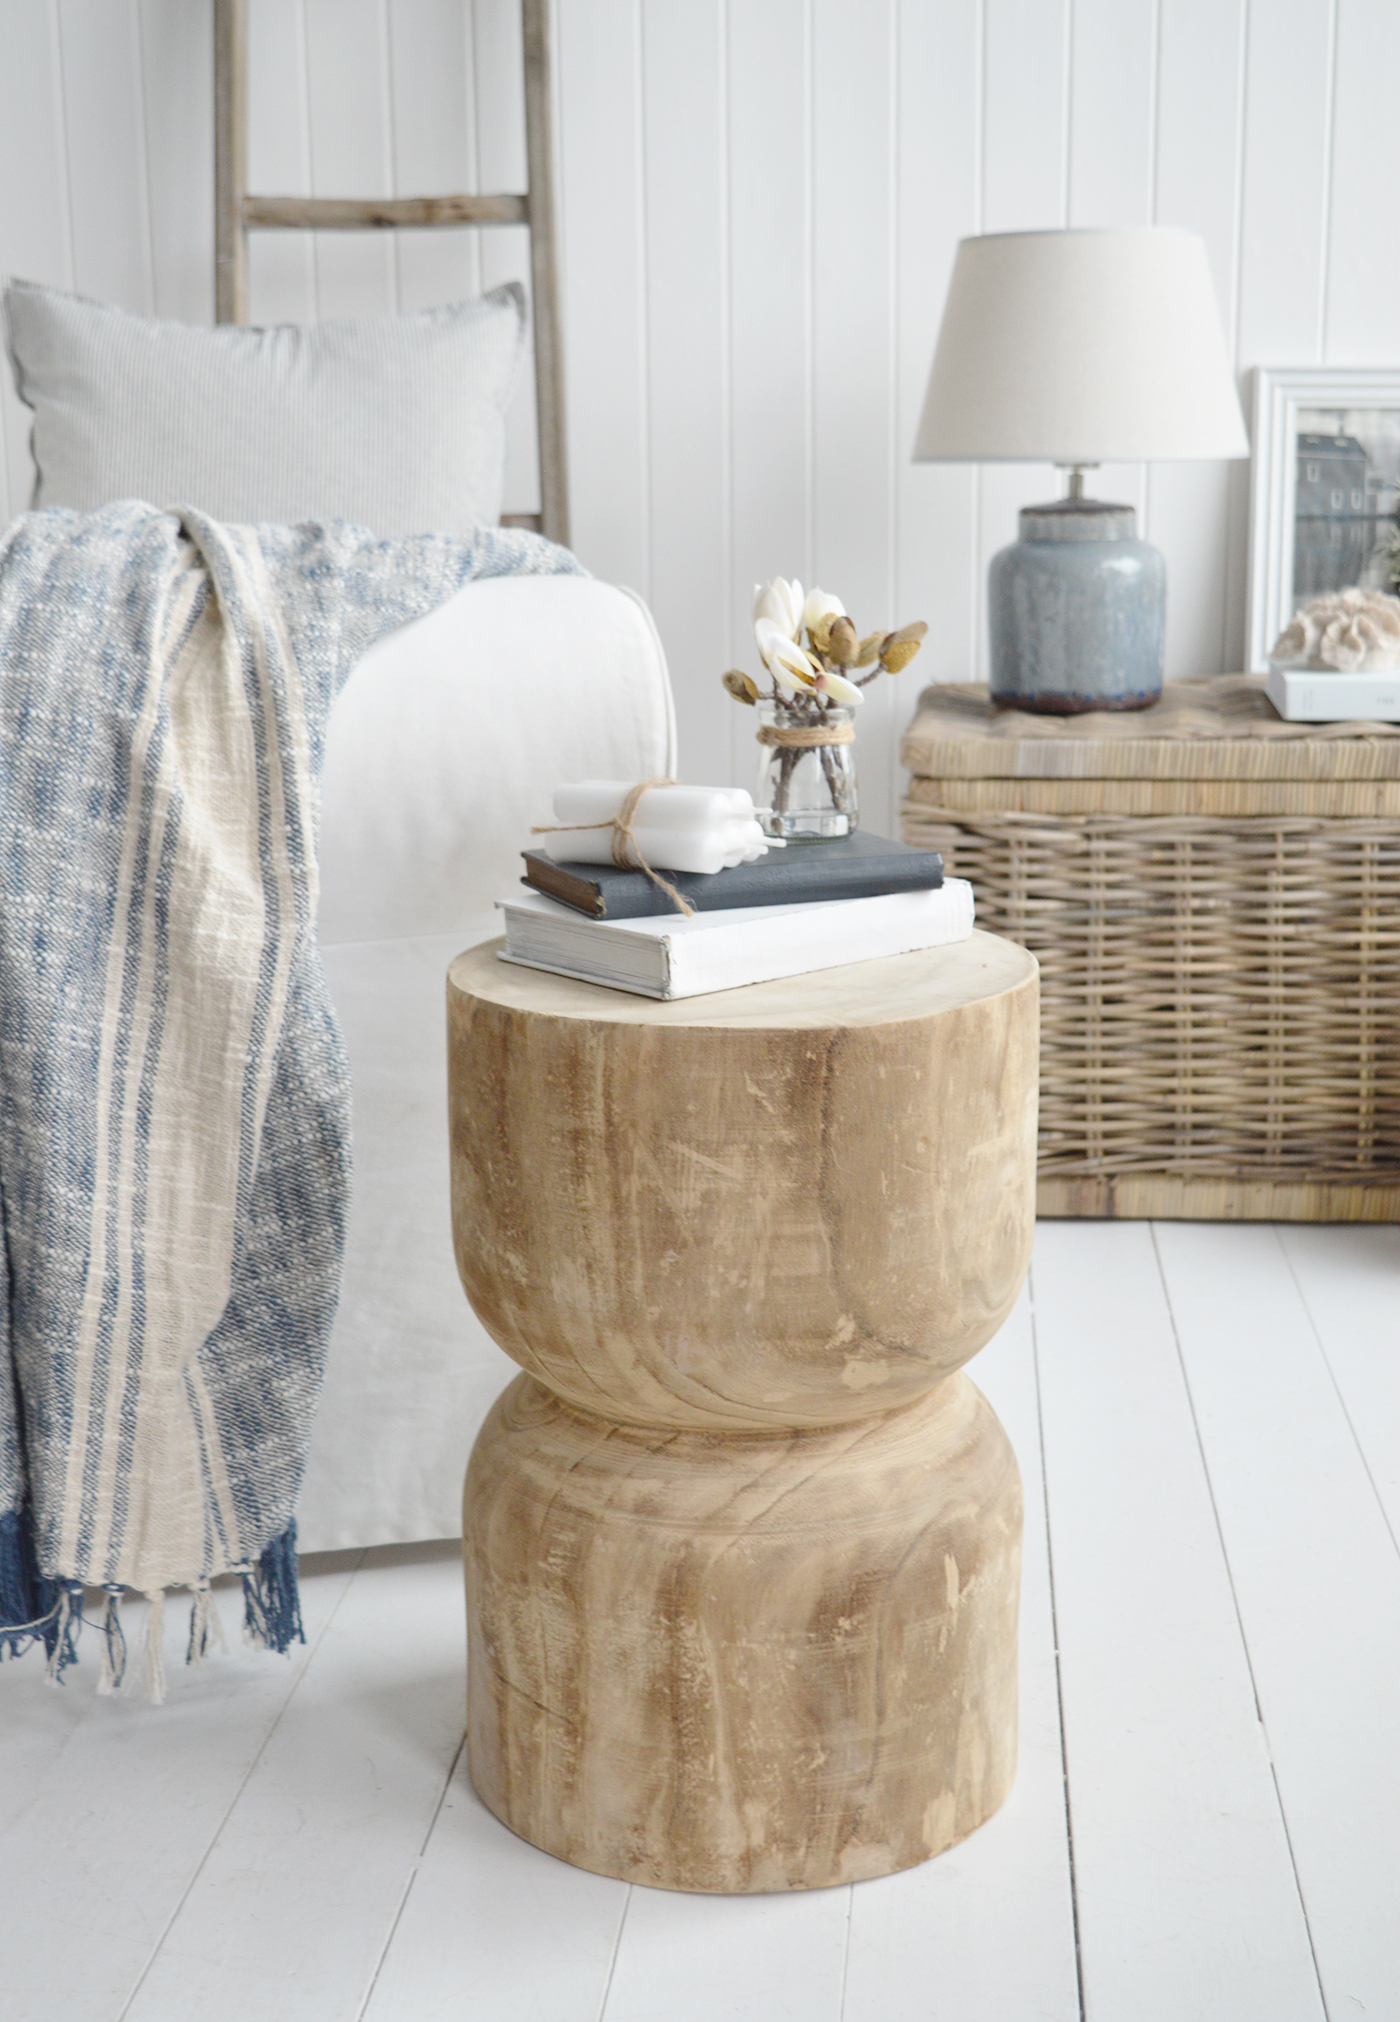 A perfect piece of coastal furniture for a living room, the Ascot wooden side table to add texture and warmth into a New England space